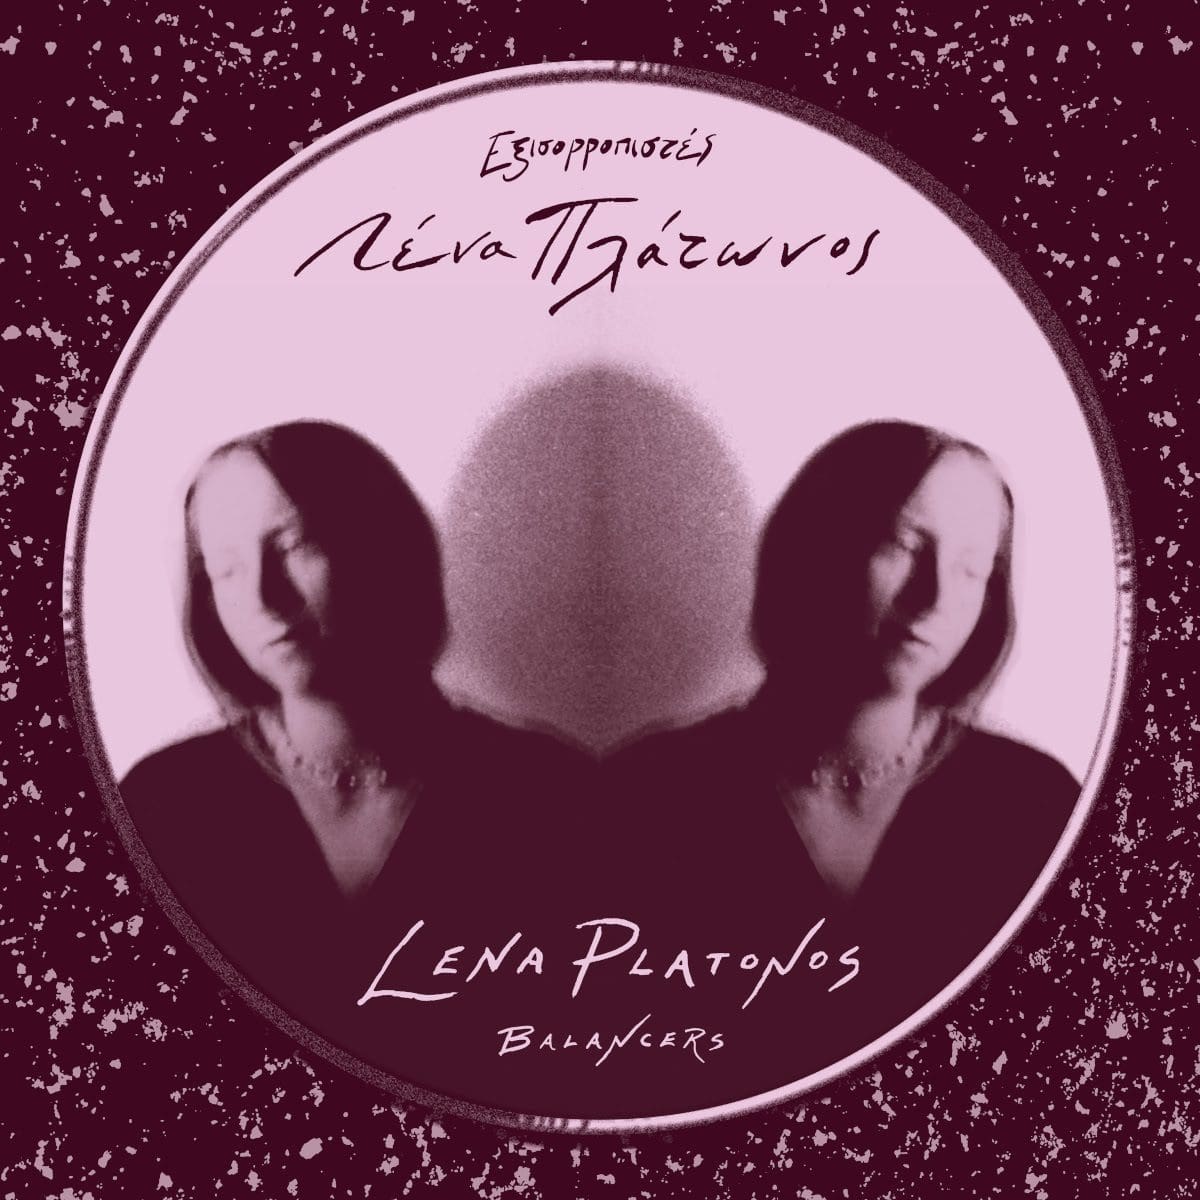 Greek electronic music legend Lena Platonos issues previously unreleased material recorded between 1982-1985 via Dark Entries label